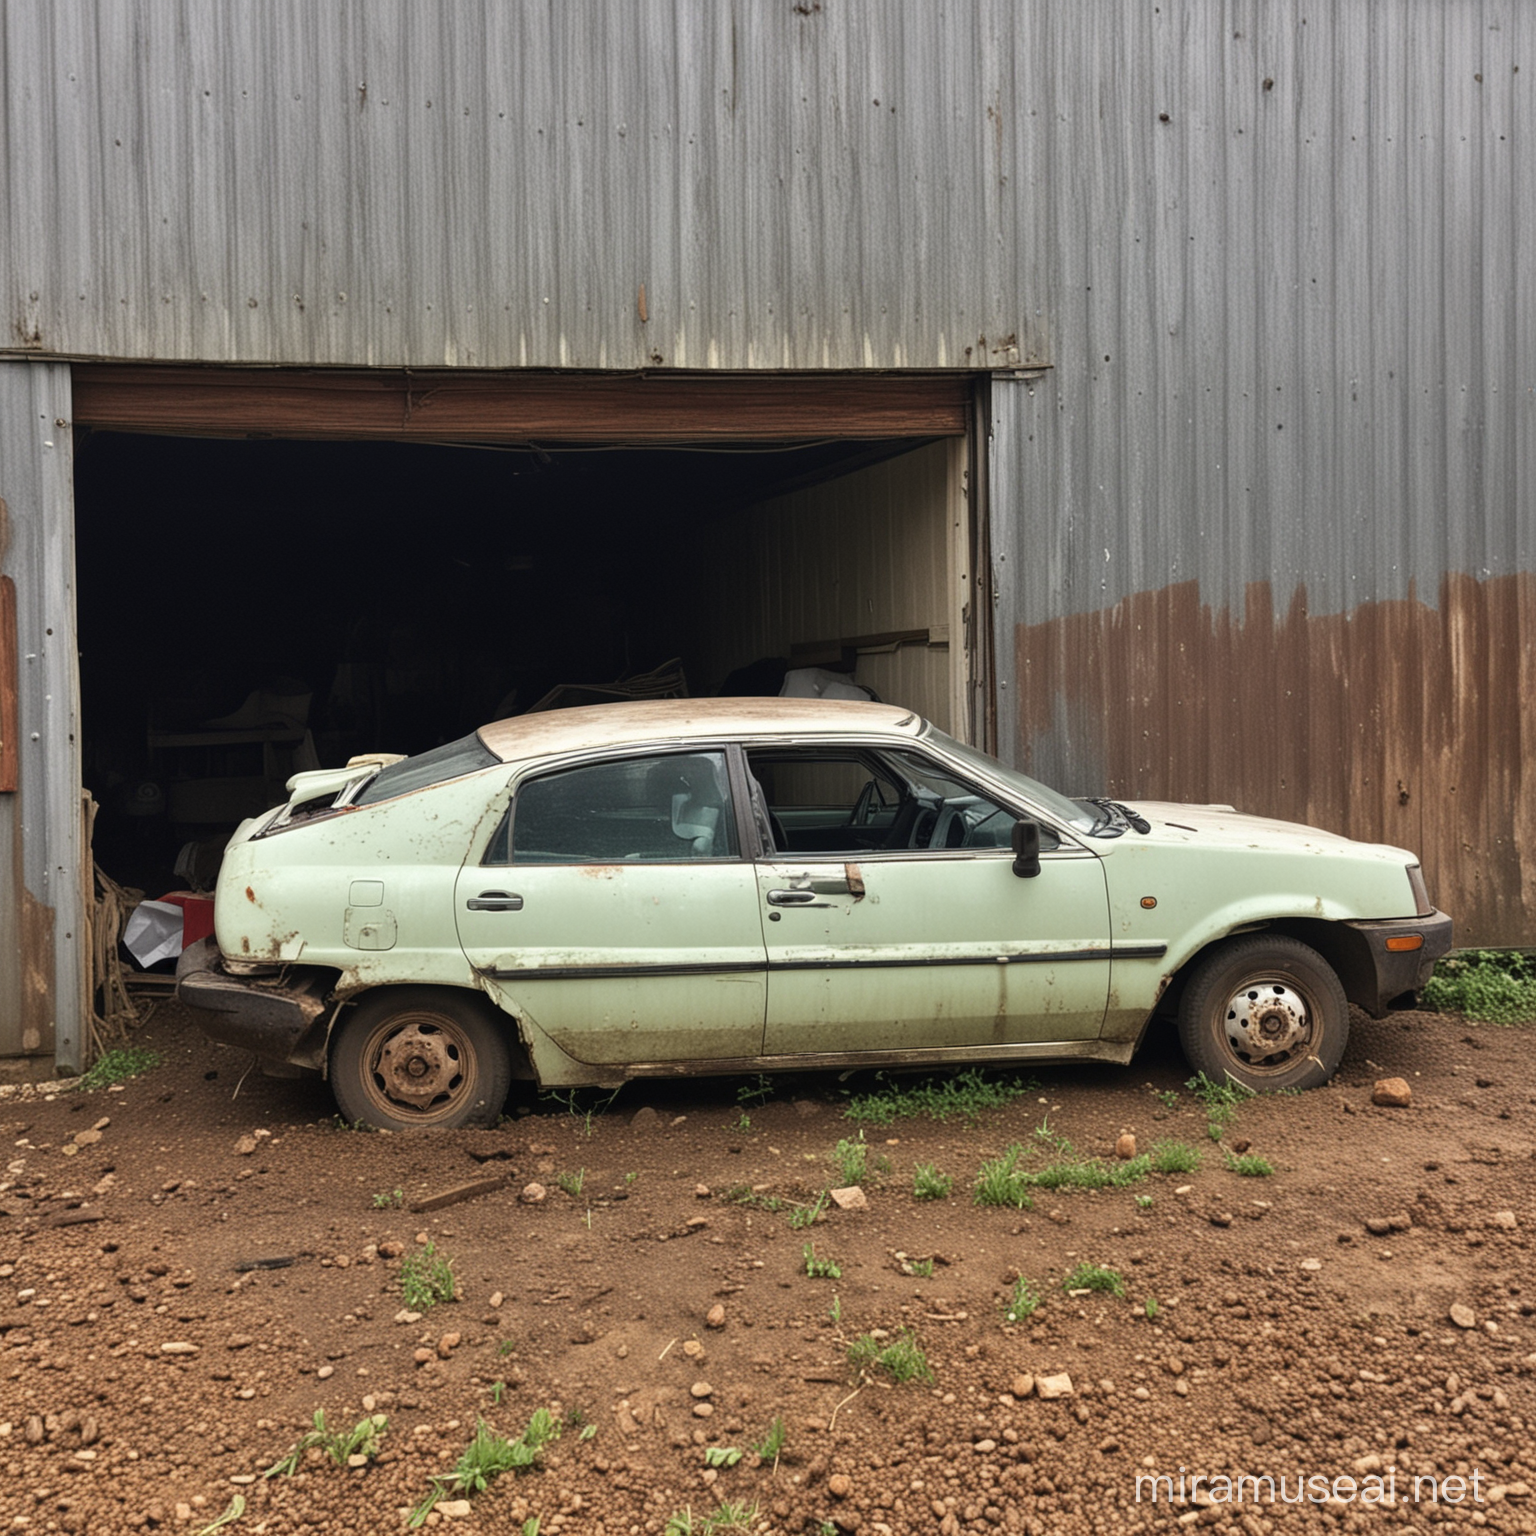 Discovering Toyota Prius Abandoned in a Rustic Barn